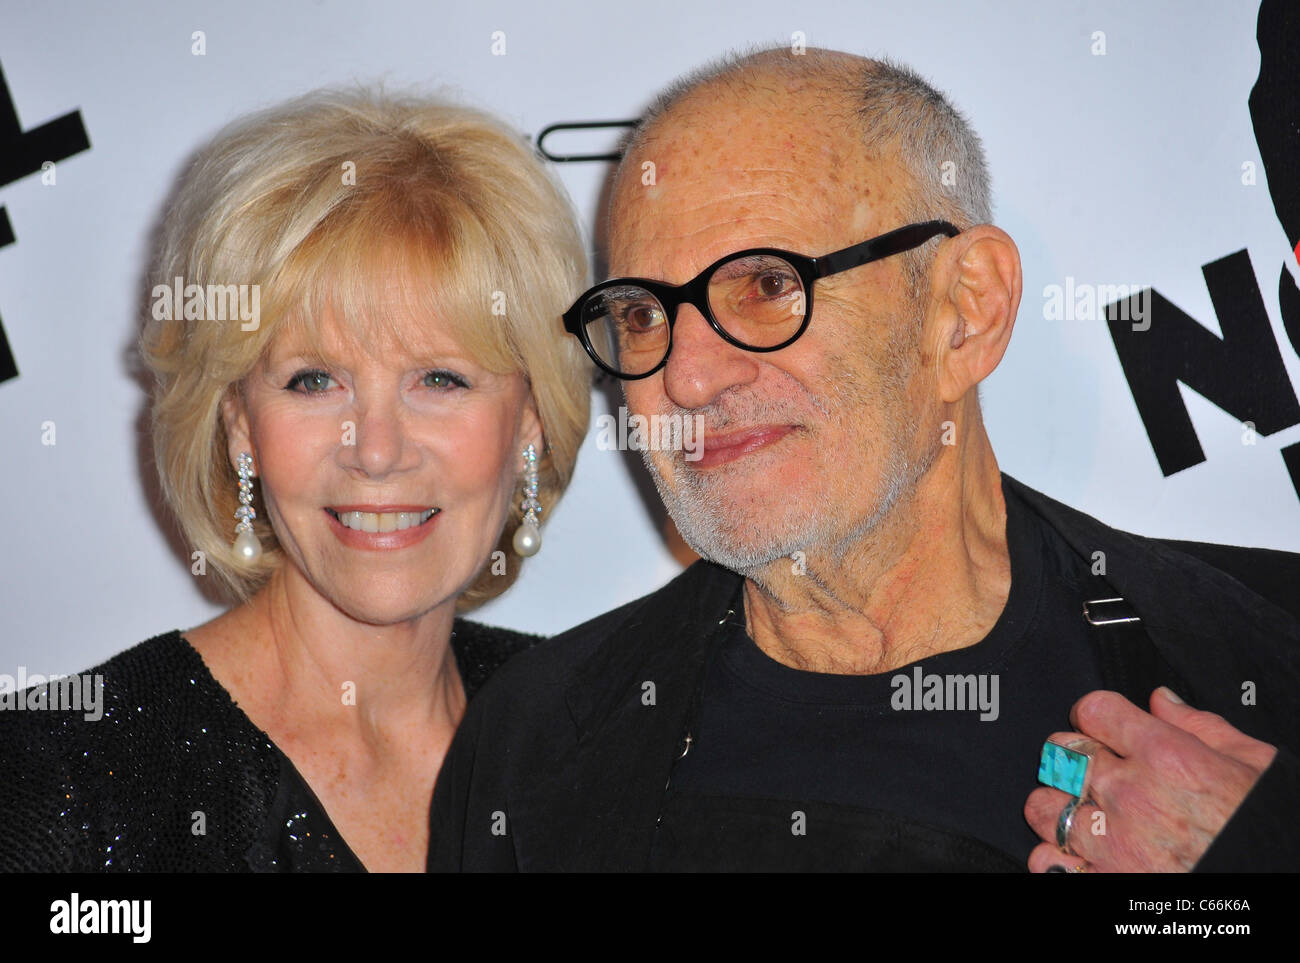 Daryl Roth, Larry Kramer in attendance for THE NORMAL HEART Revival Opening Night on Broadway, The Golden Theatre, New York, NY Stock Photo